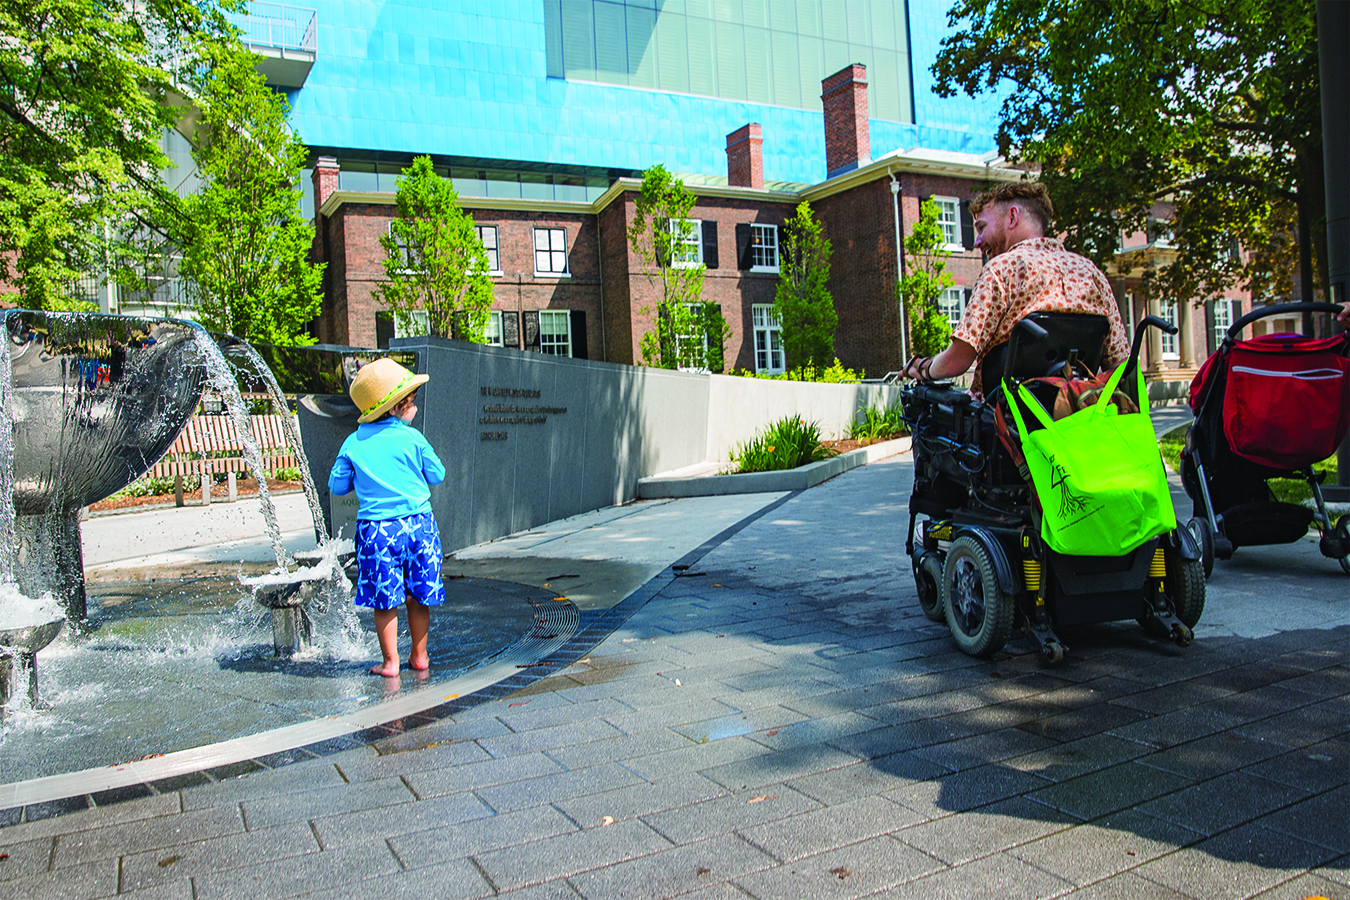 Anderson says hi to a young boy playing in a fountain as he wheels by on a paved path.